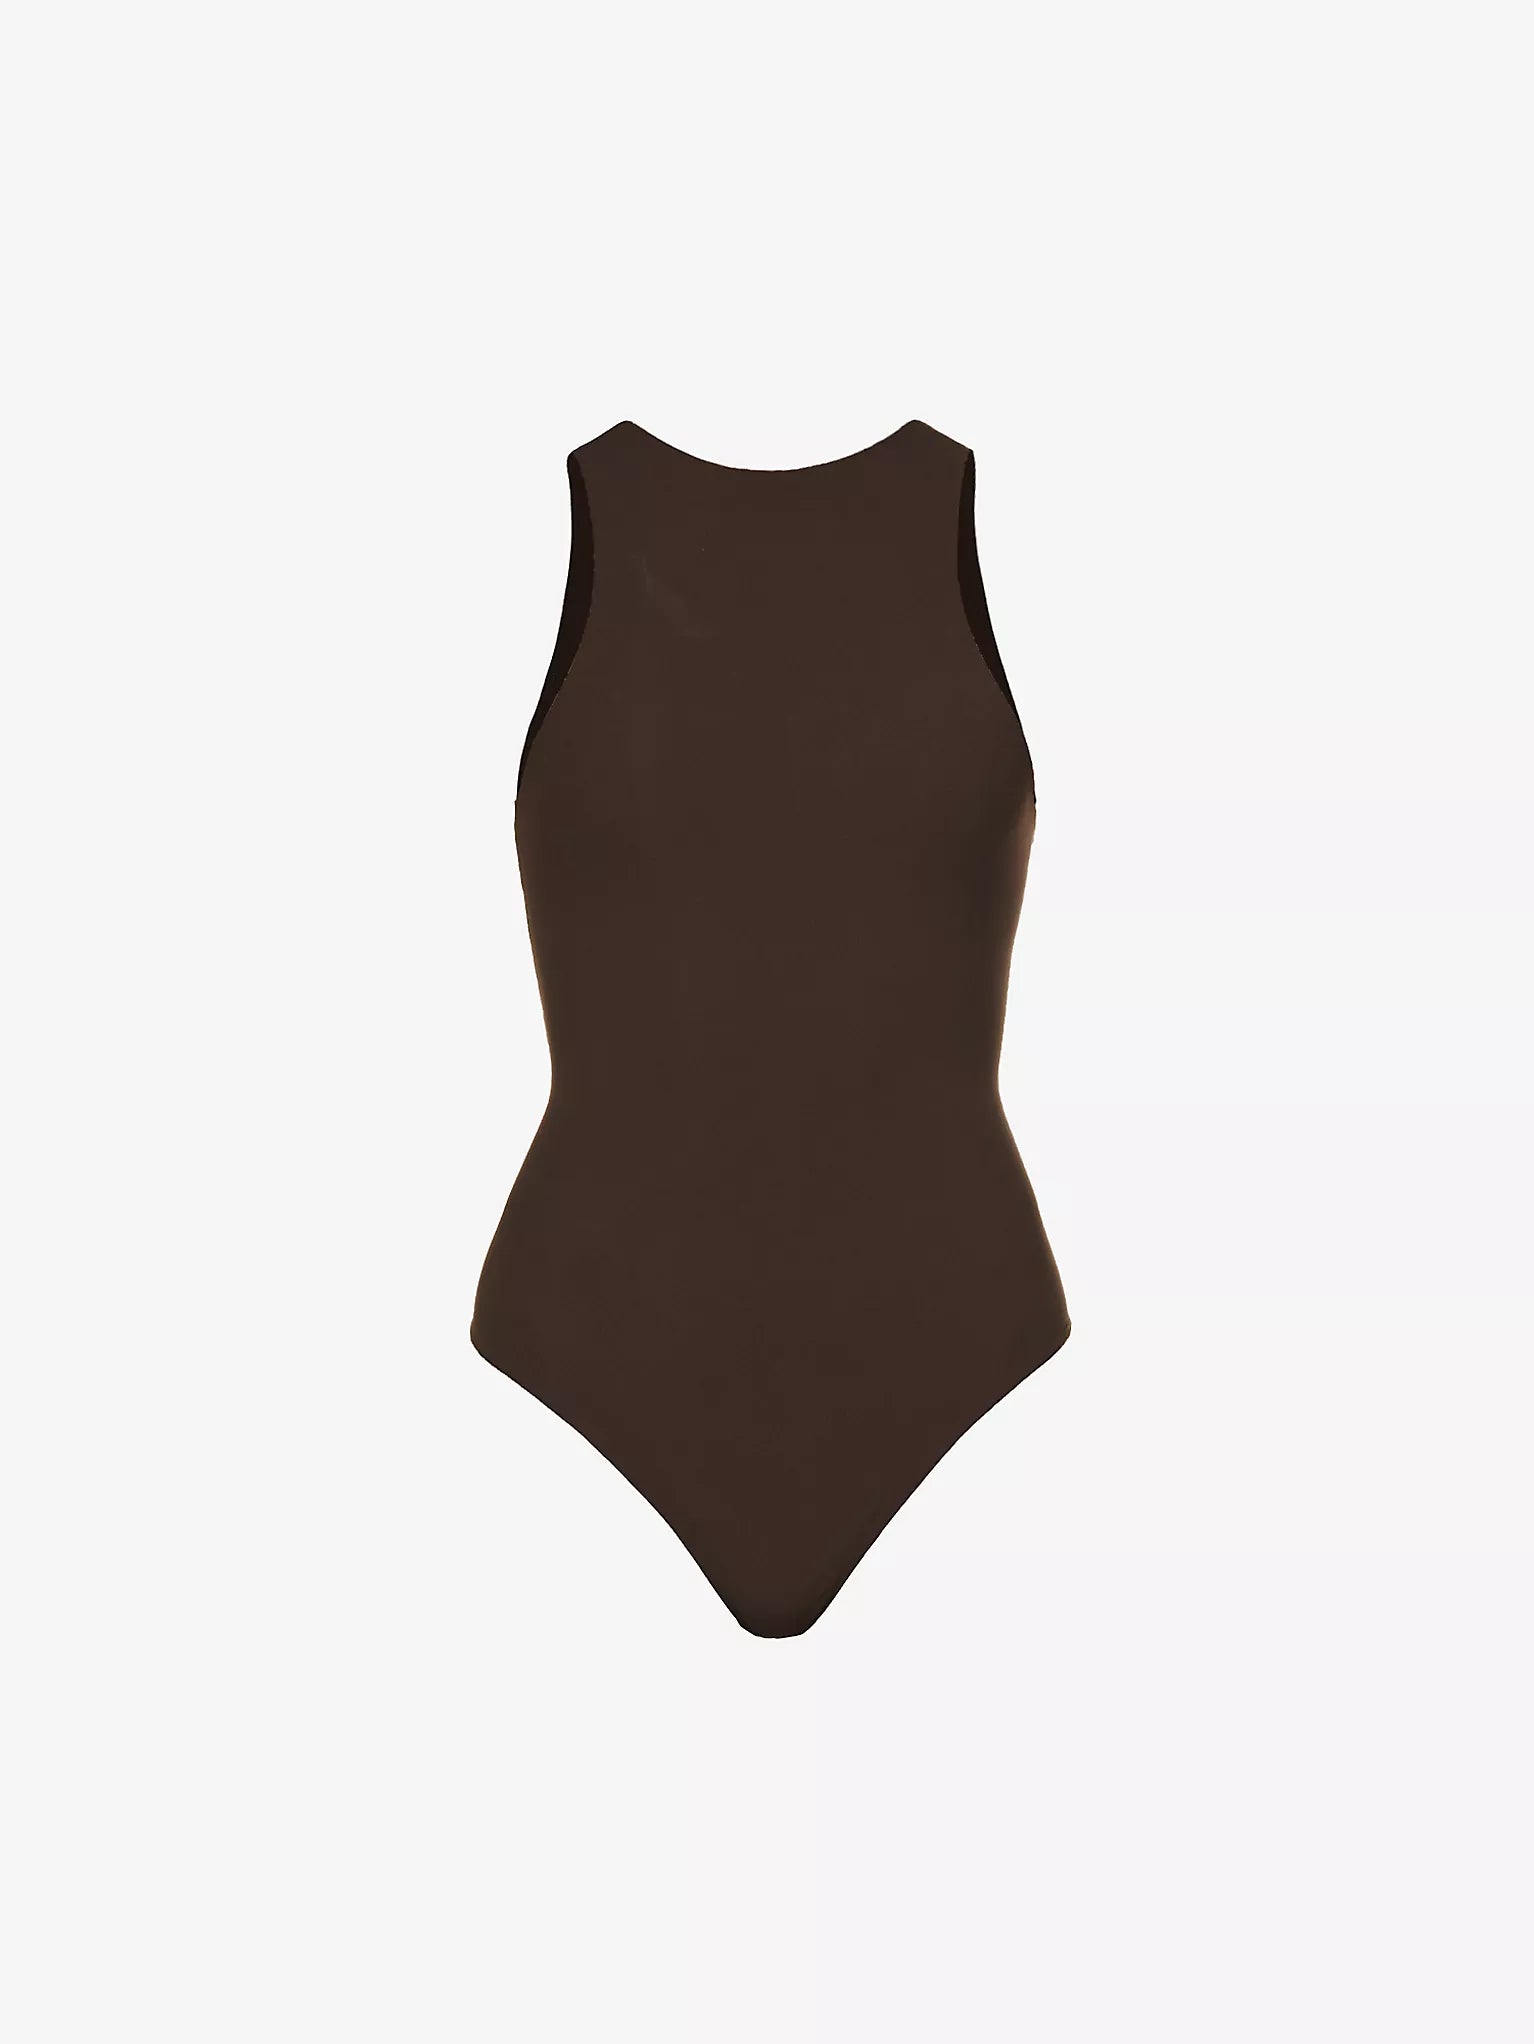 SKIMS, Tops, New Skims Fits Everybody Square Neck Bodysuit In Large